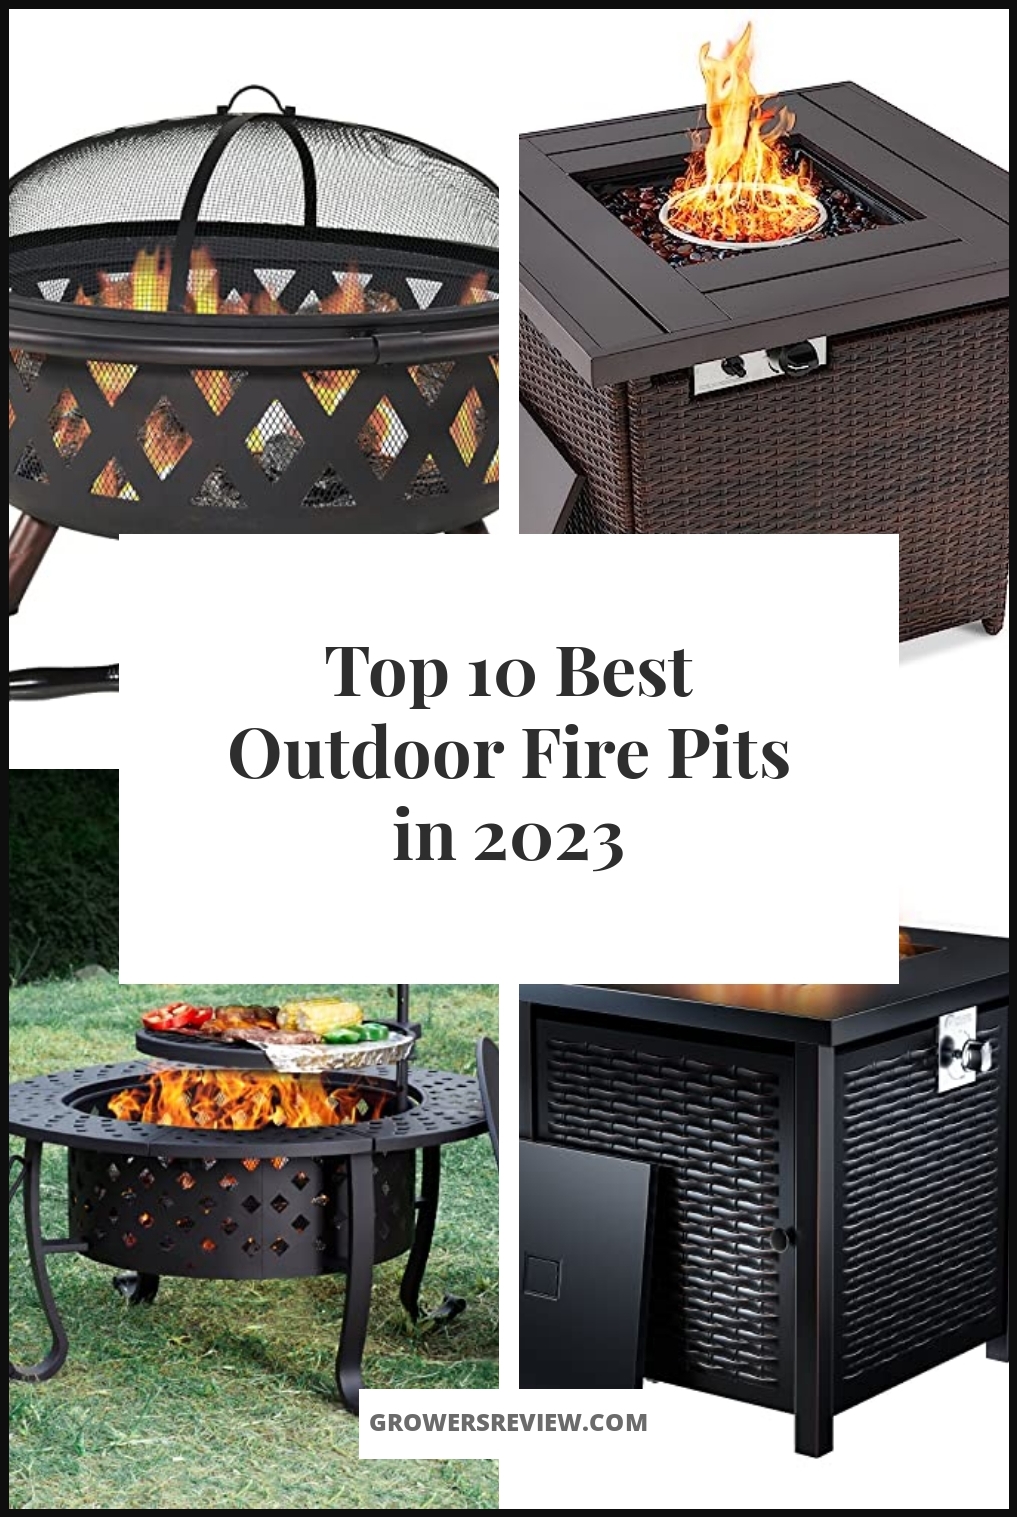 Best Outdoor Fire Pits - Buying Guide